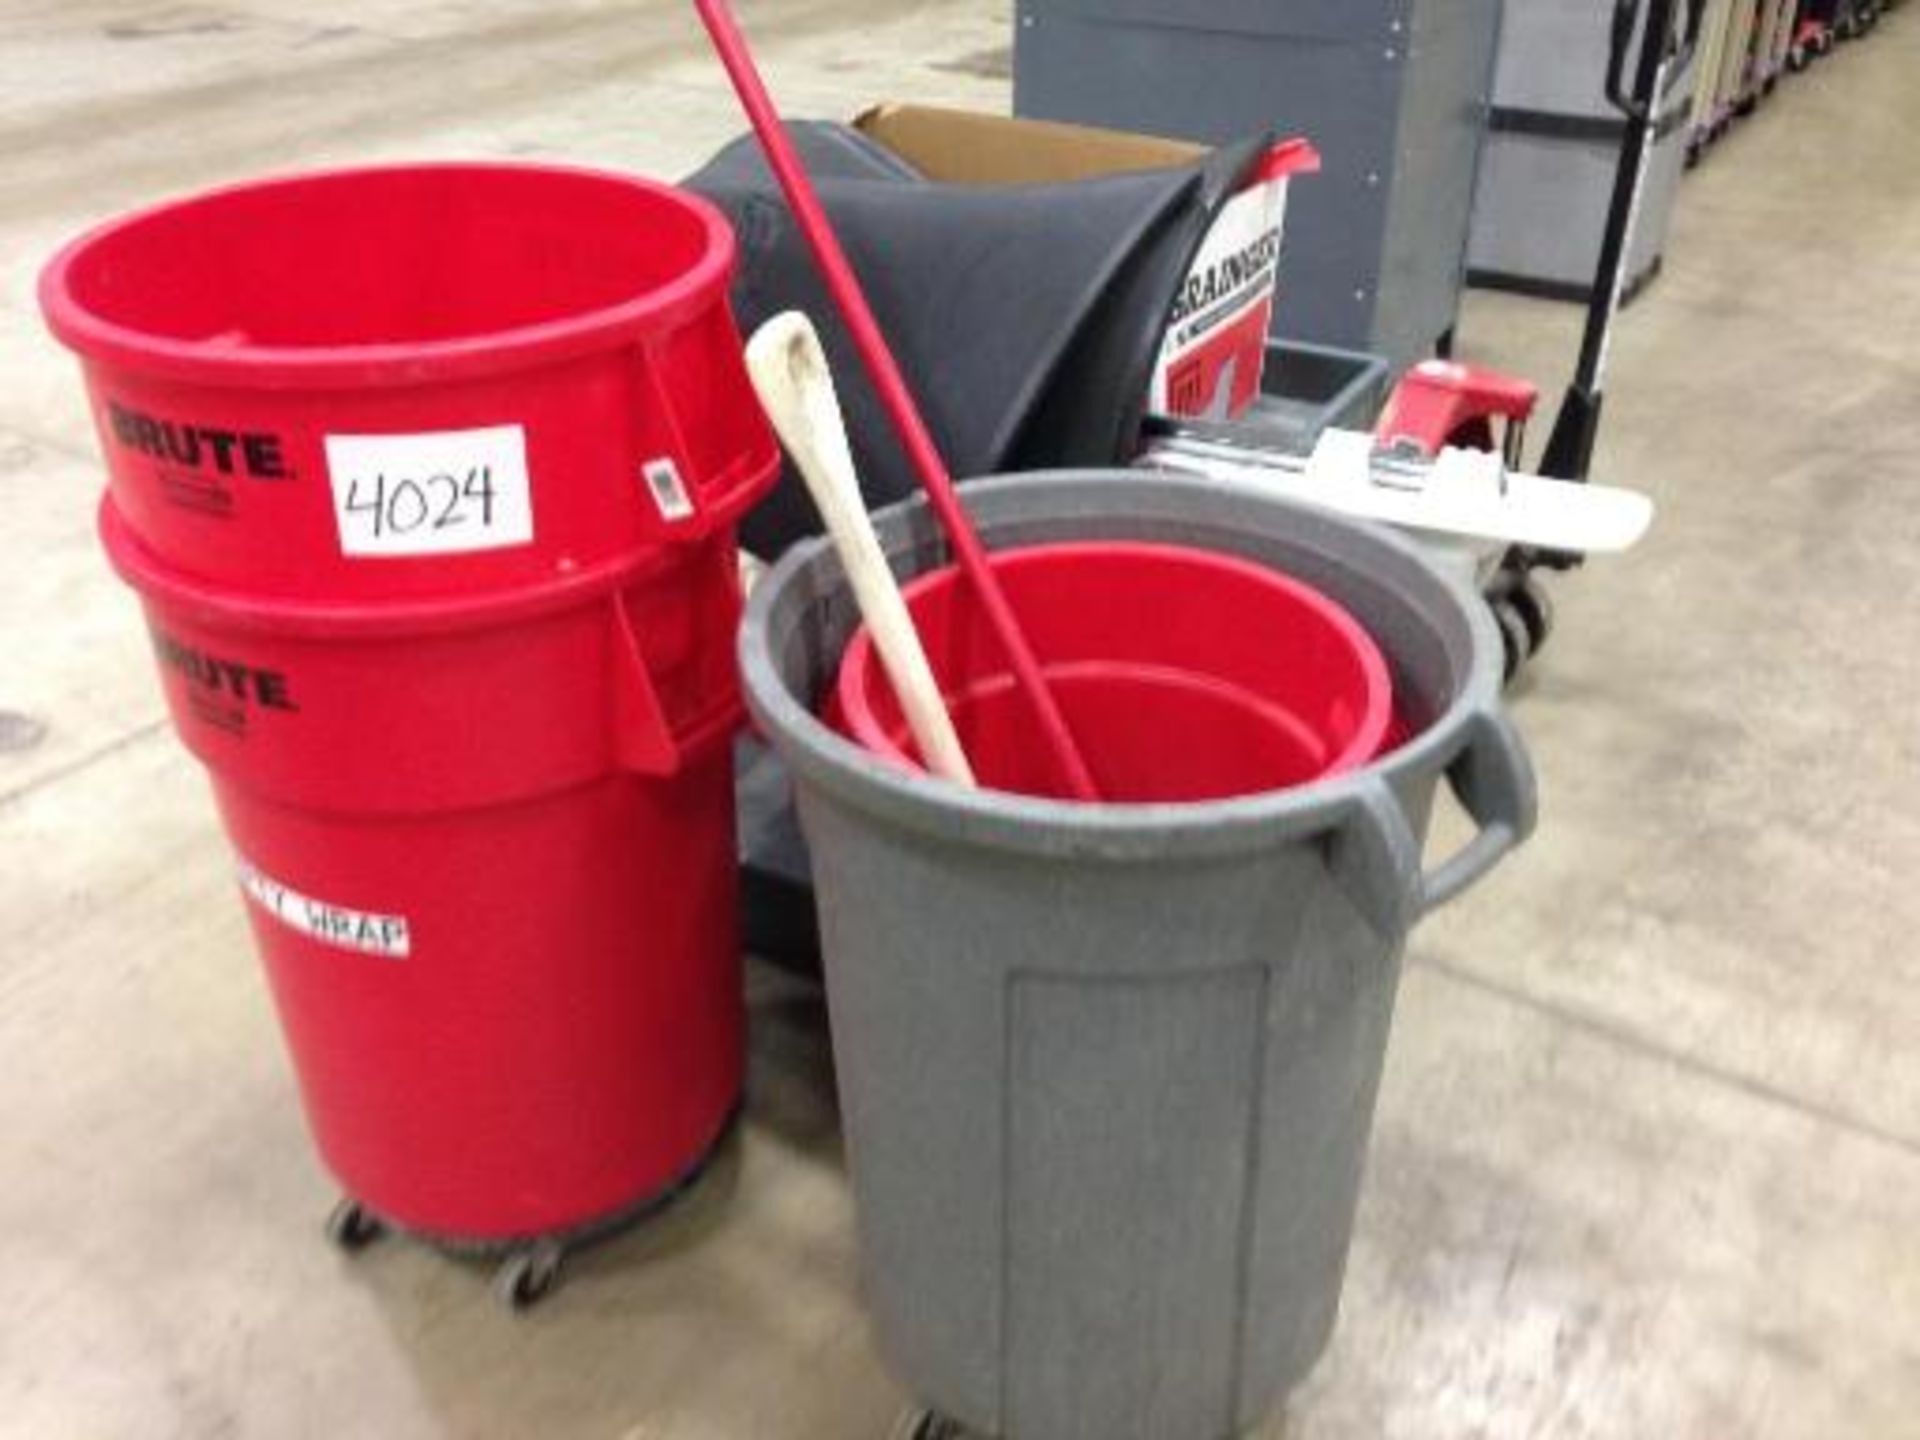 (3) Brute red cans, 1 grey, sanitation equipment (LOT) This item located in Grand Rapids,